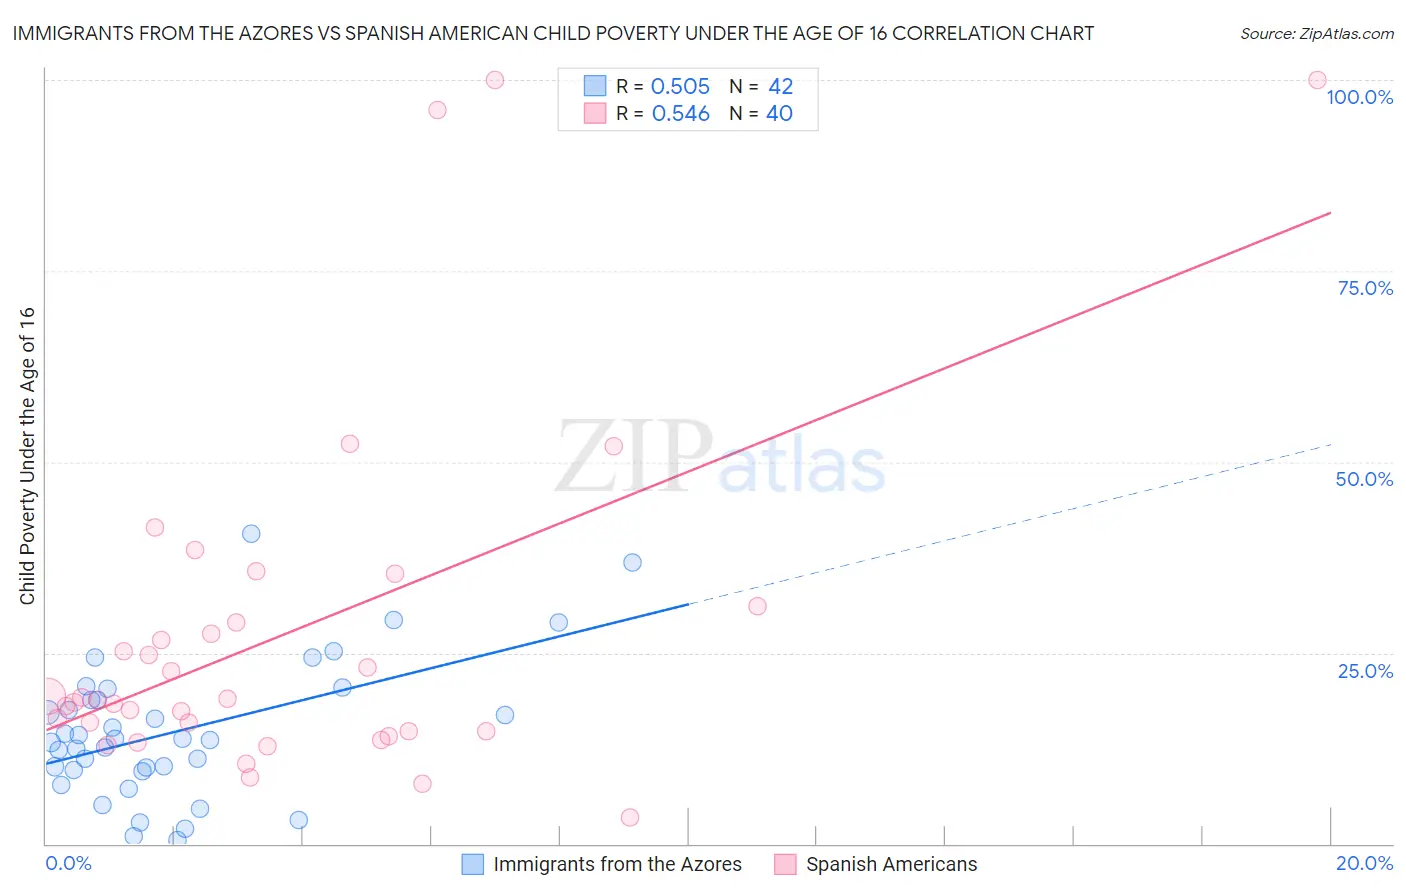 Immigrants from the Azores vs Spanish American Child Poverty Under the Age of 16